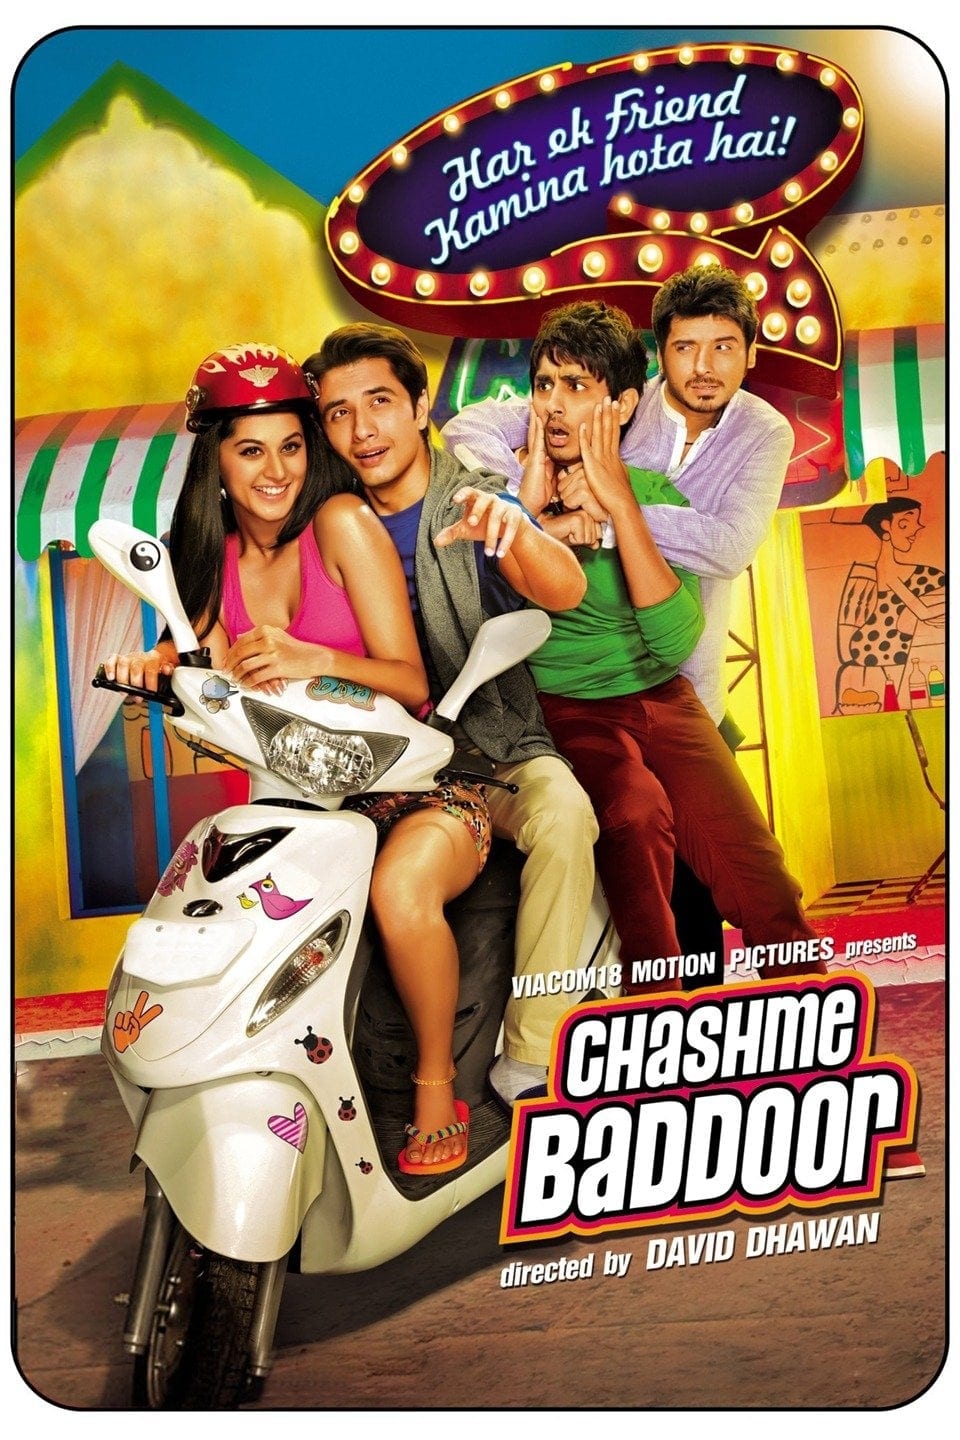 Poster for the movie "Chashme Baddoor"